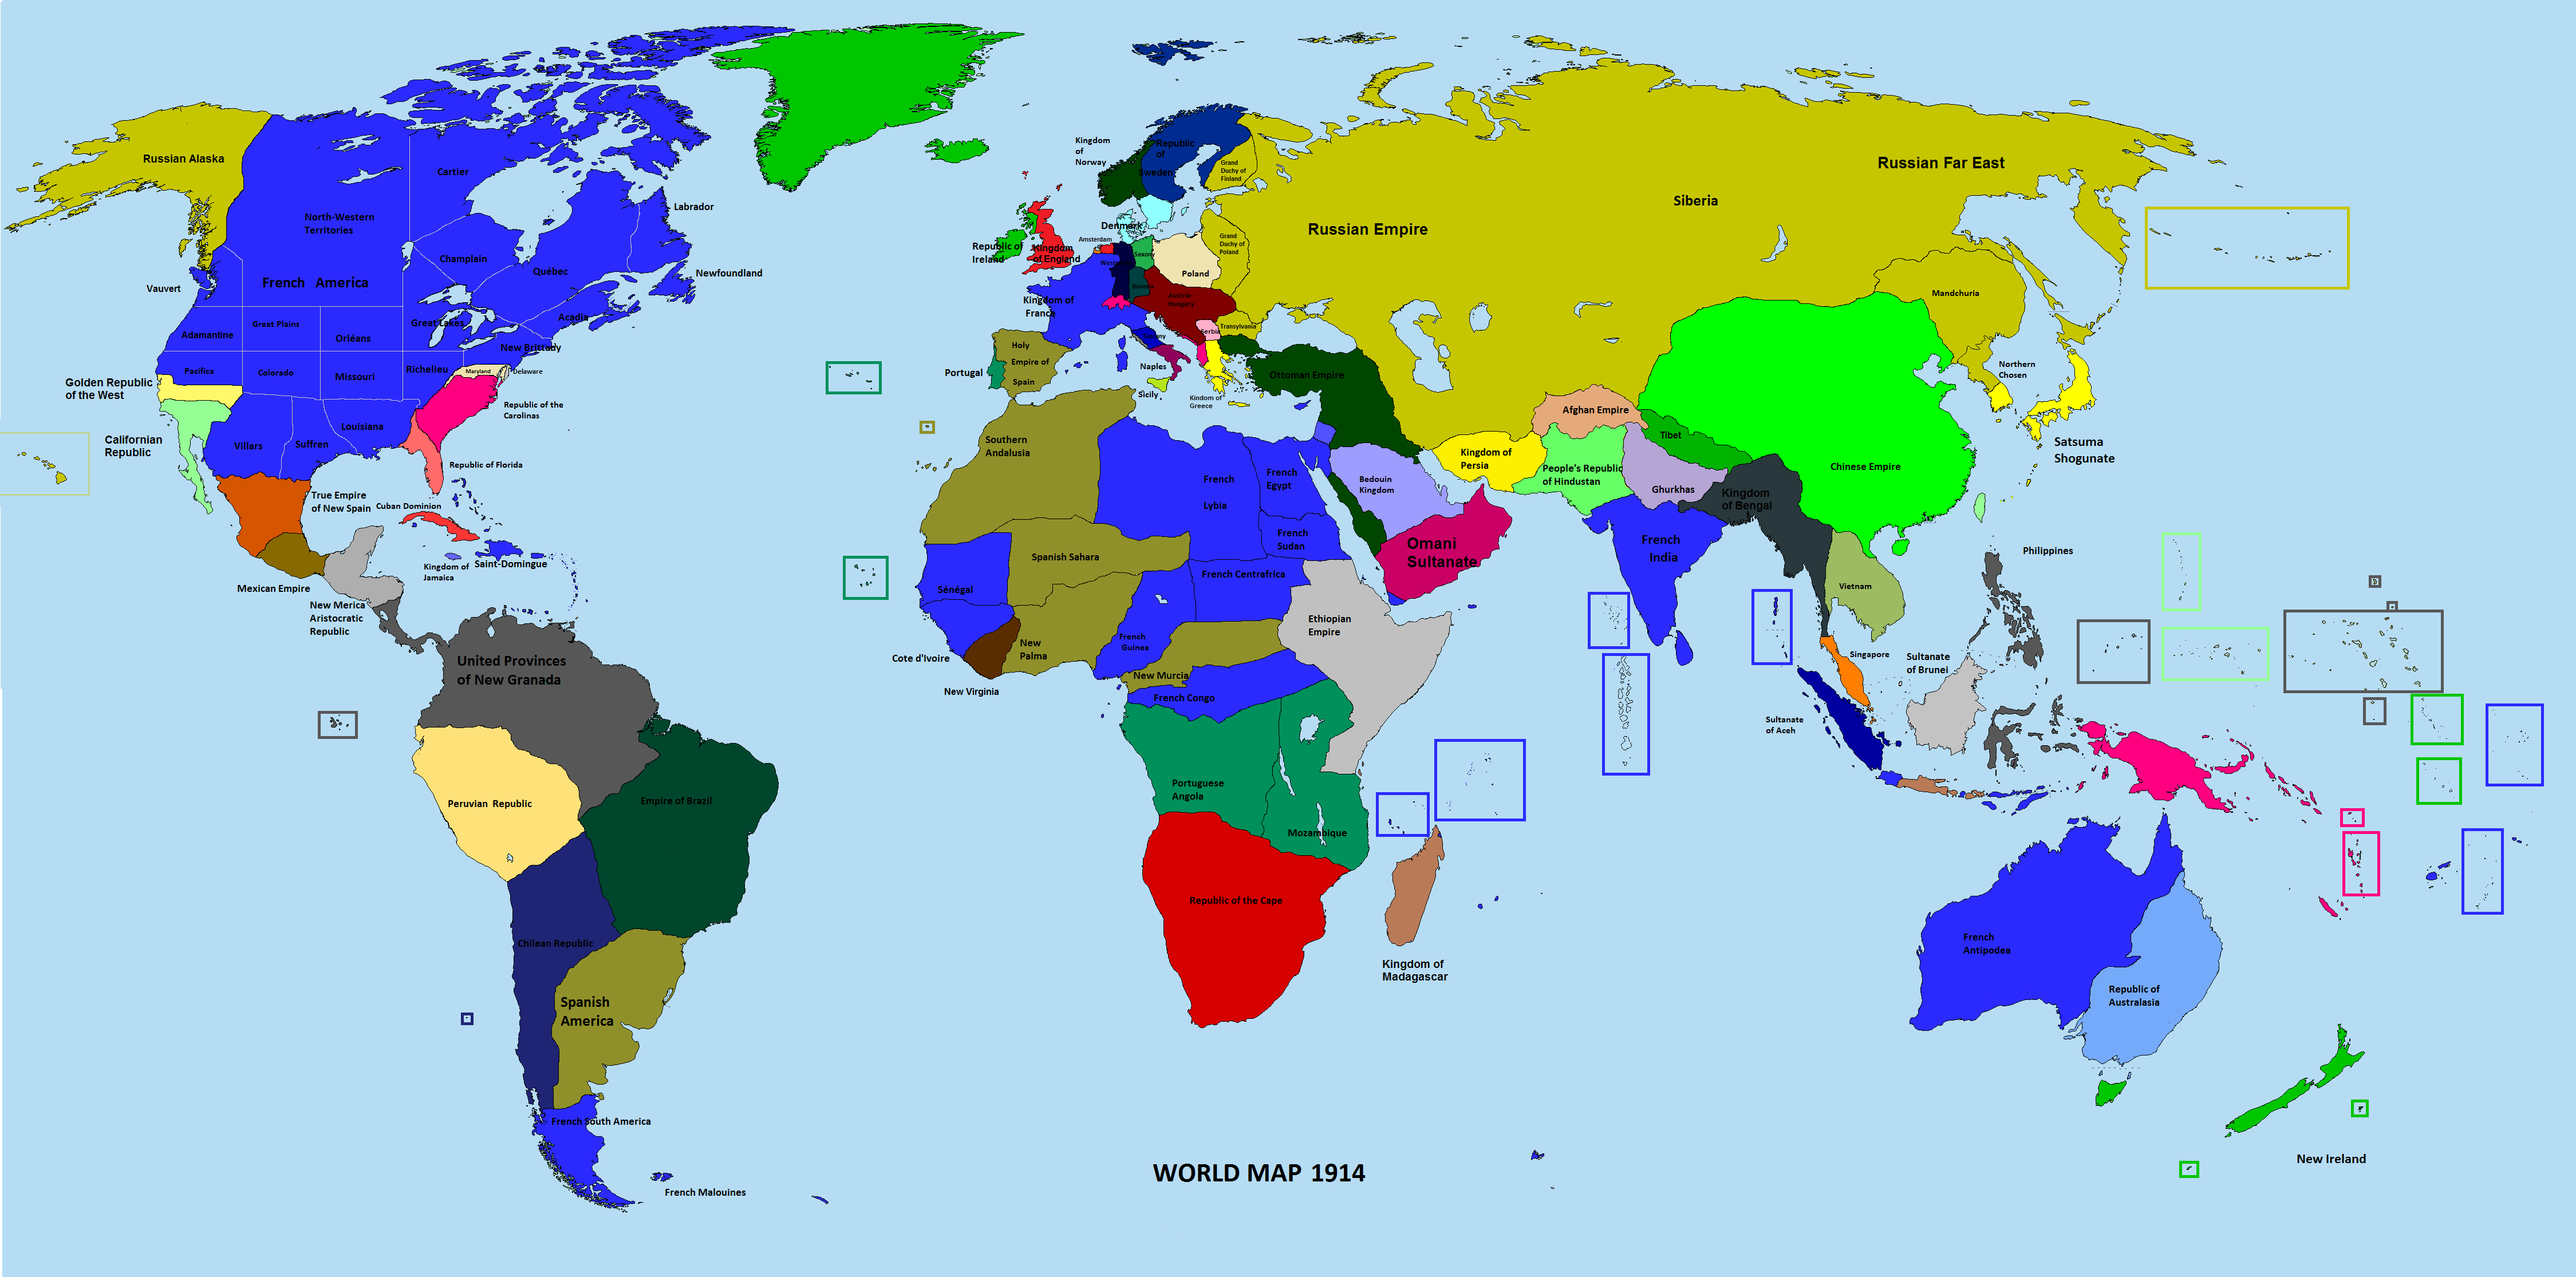 World map 1914.png